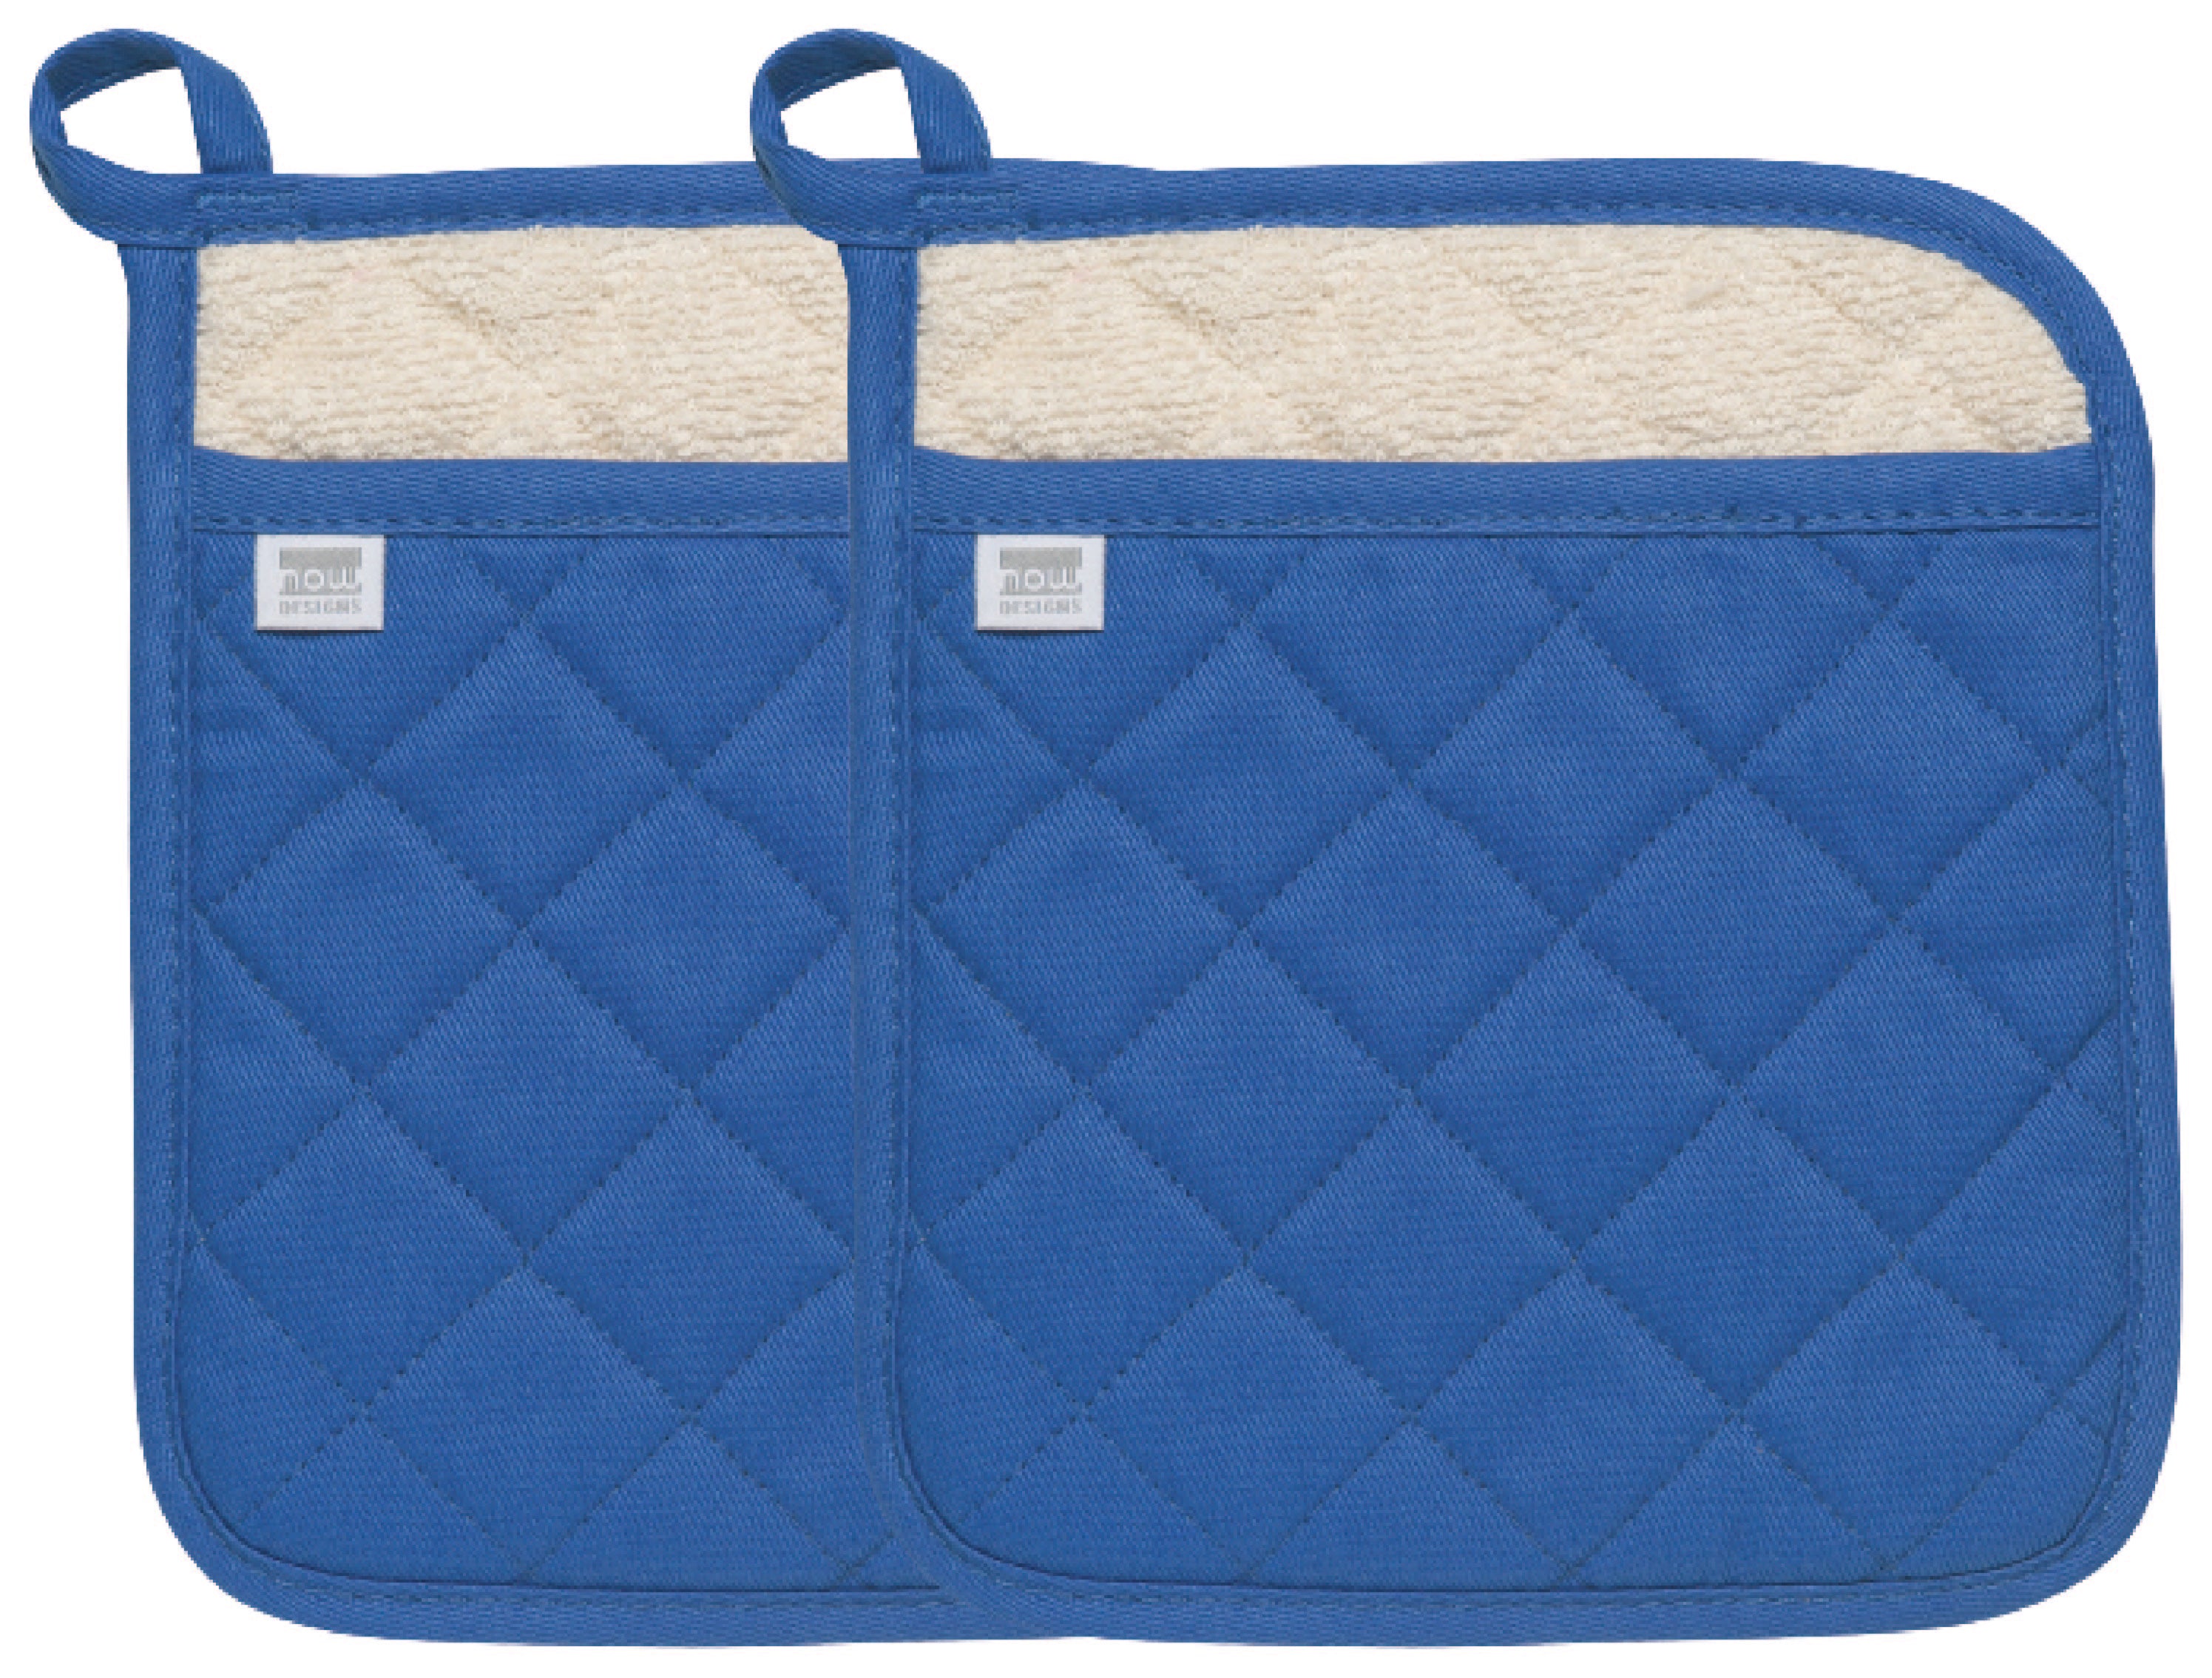 Royal Blue - Superior Potholders by Now Designs®